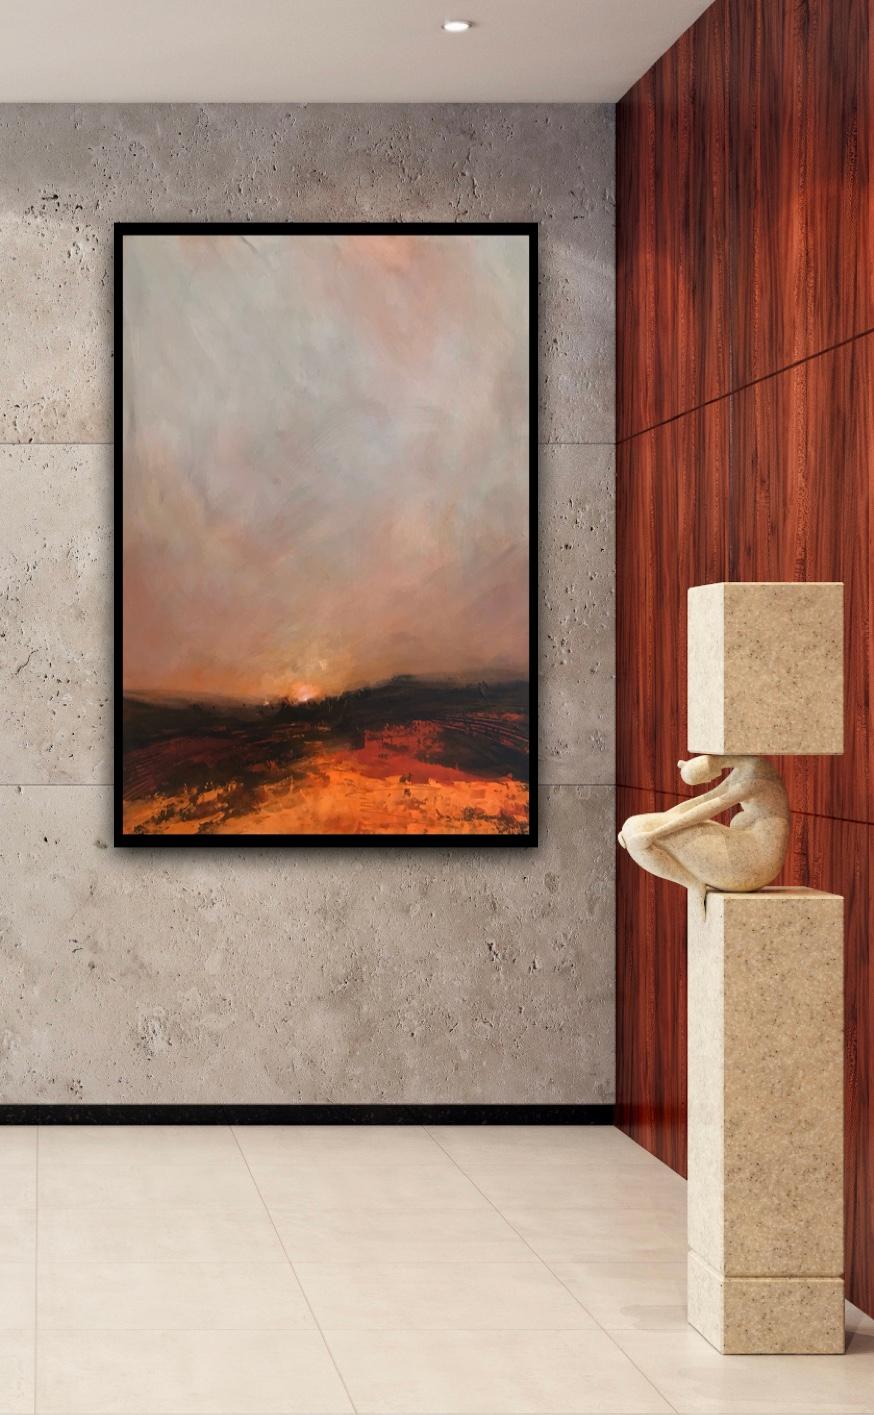 Hilltop by David Hay [2021]

original
Acrylic
Image size: H:70 cm x W:100 cm
Complete Size of Unframed Work: H:70 cm x W:100 cm x D:3cm
Sold Unframed
Please note that insitu images are purely an indication of how a piece may look

I live and paint